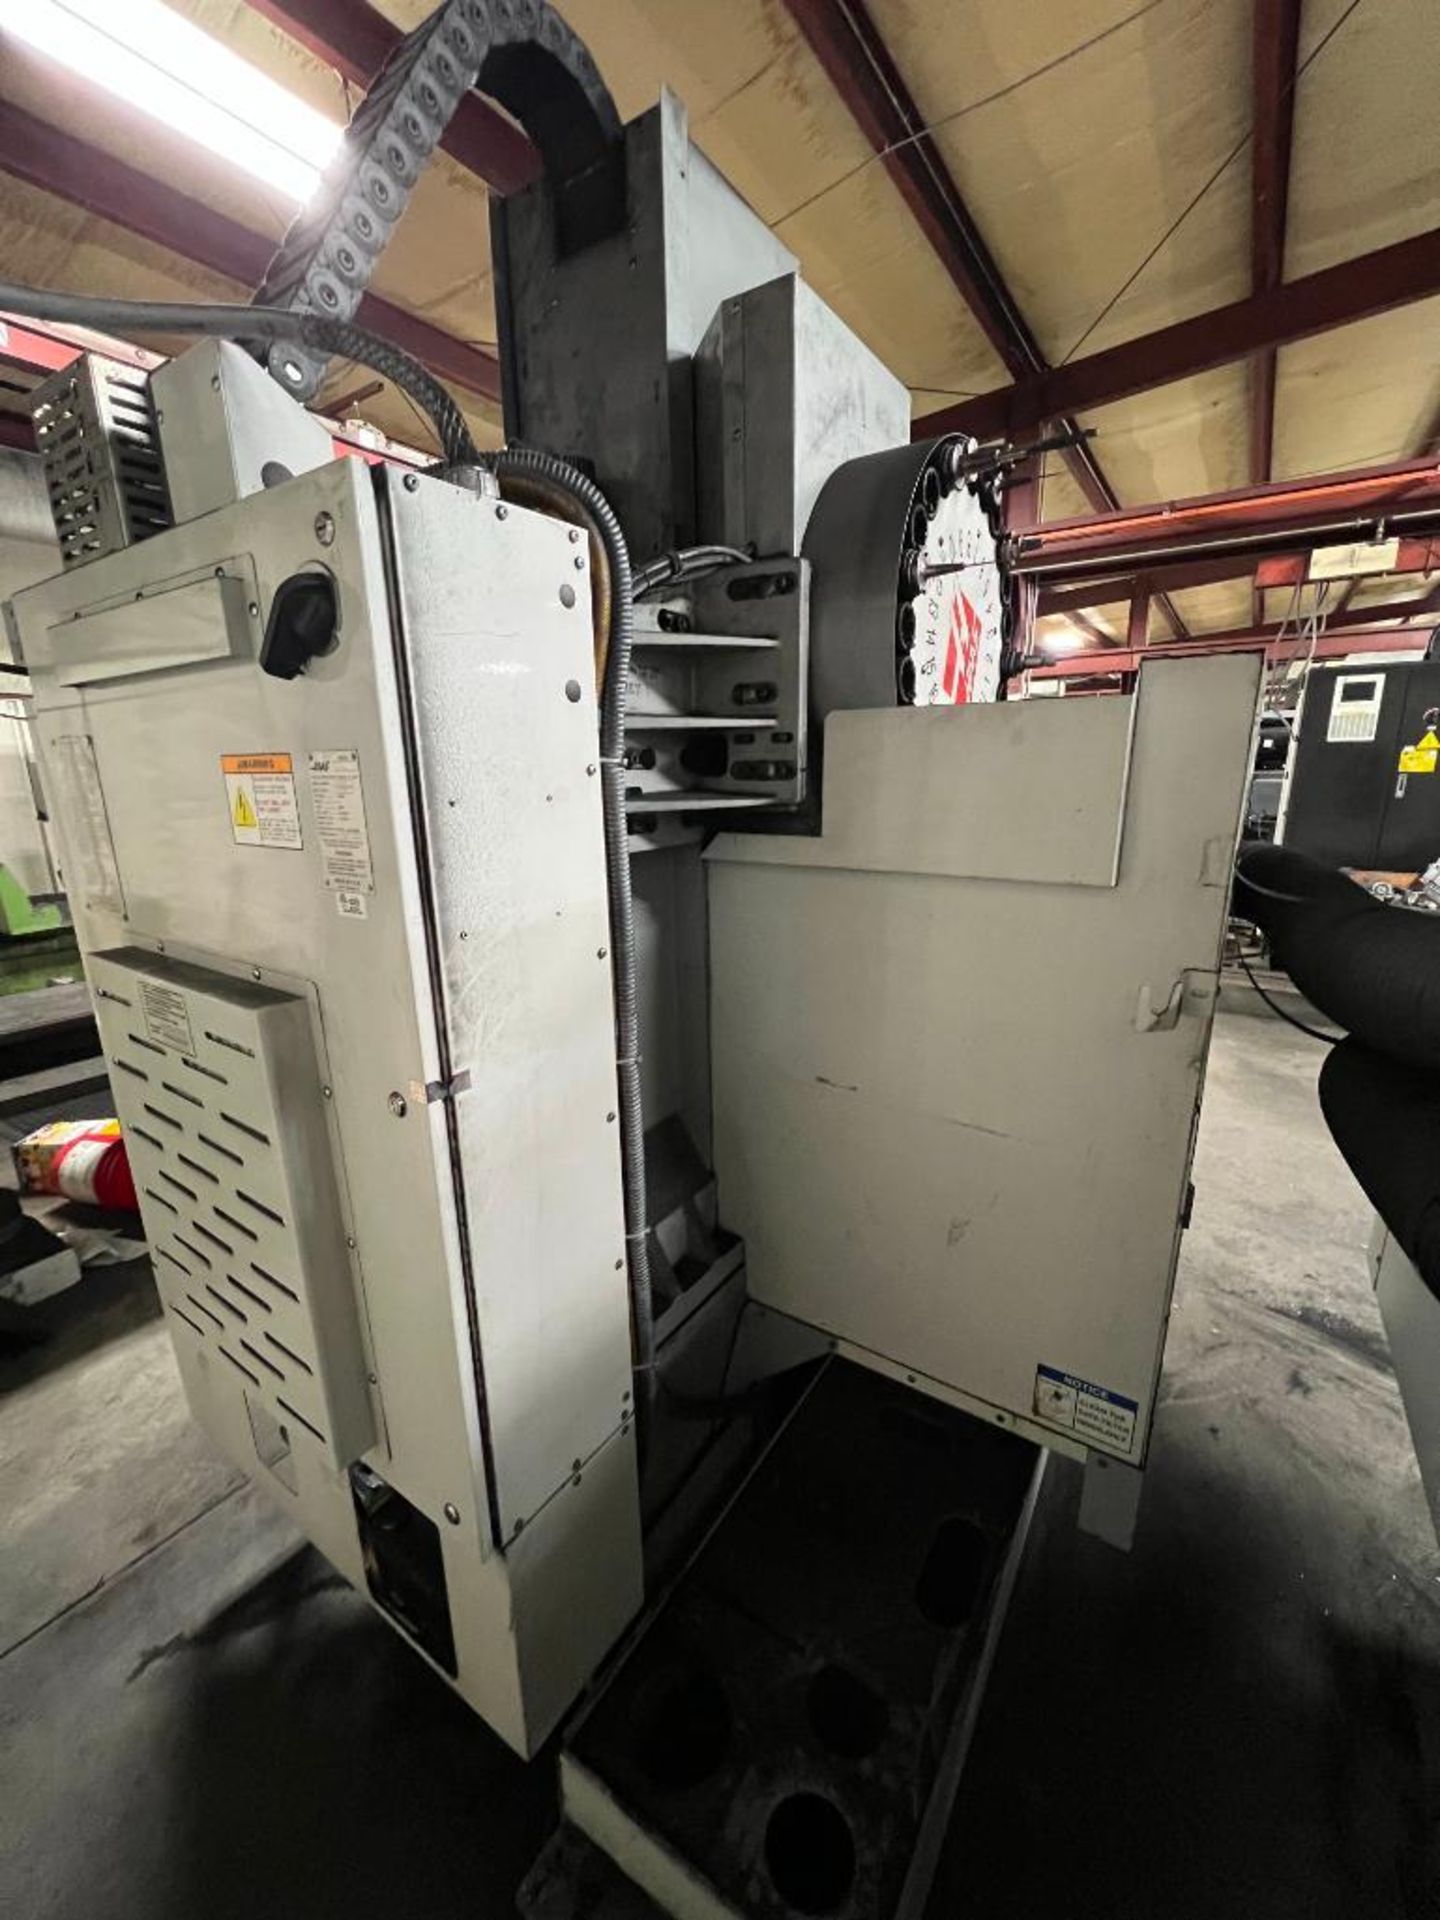 2004 Haas Super VF2 VF-2SS 3-Axis Cnc Vertical Machining Center - Image 8 of 10